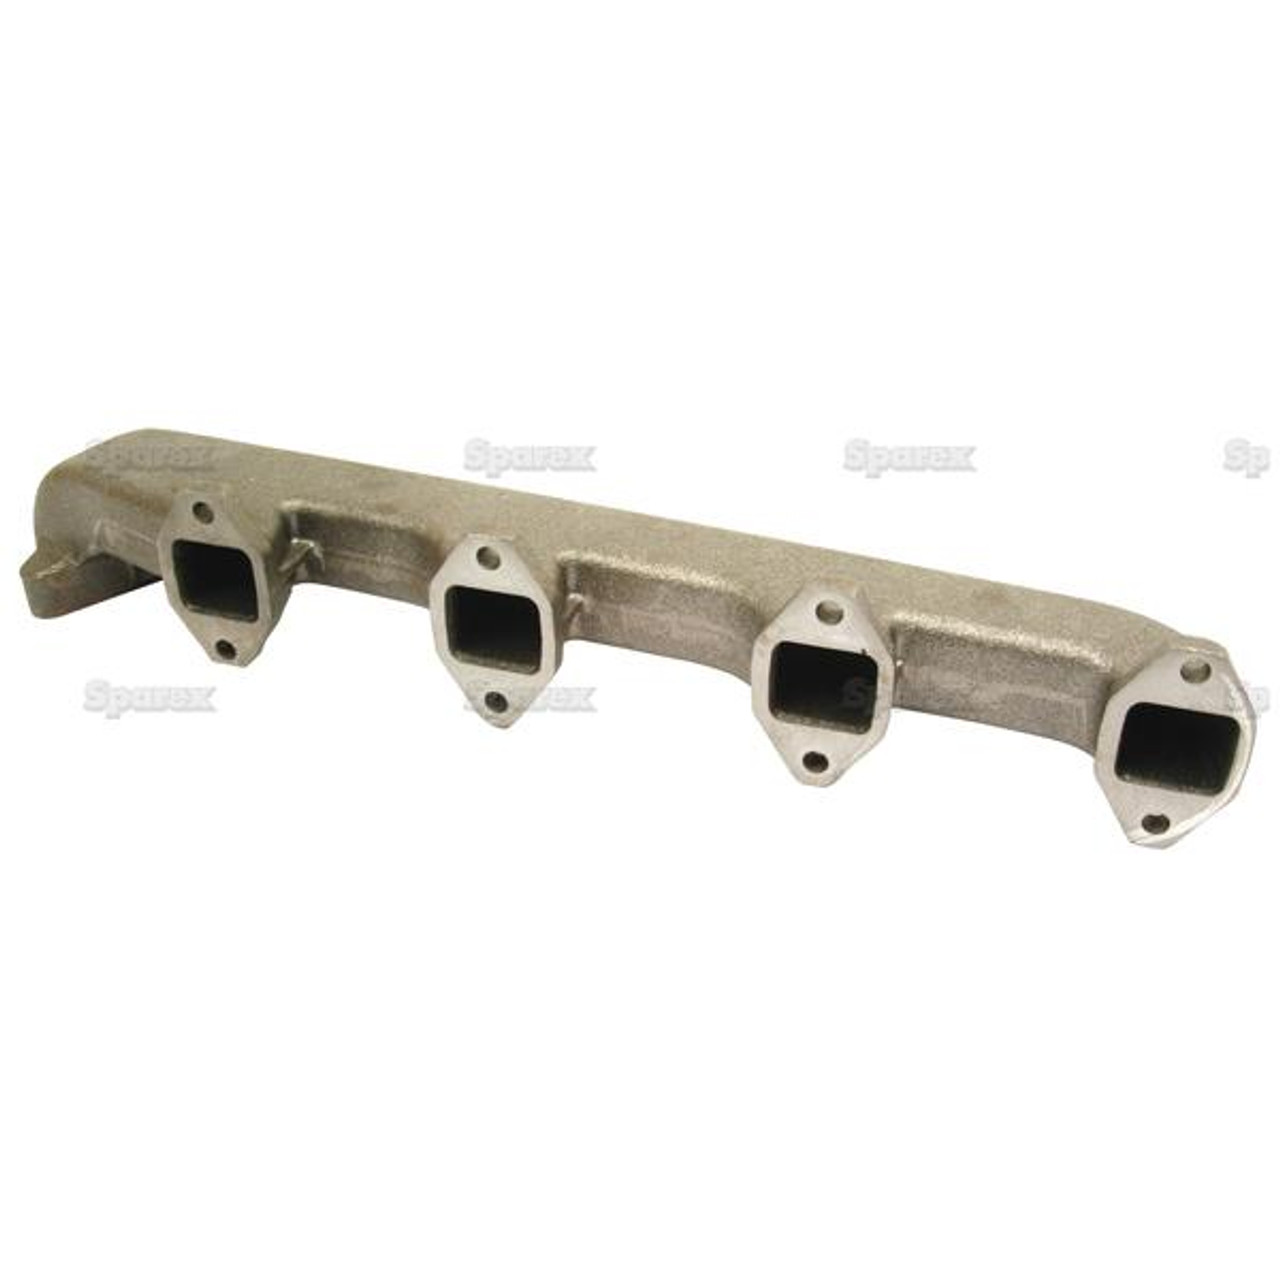 Tractor  MANIFOLD, EXHAUST, 80005092 Part Number S64876